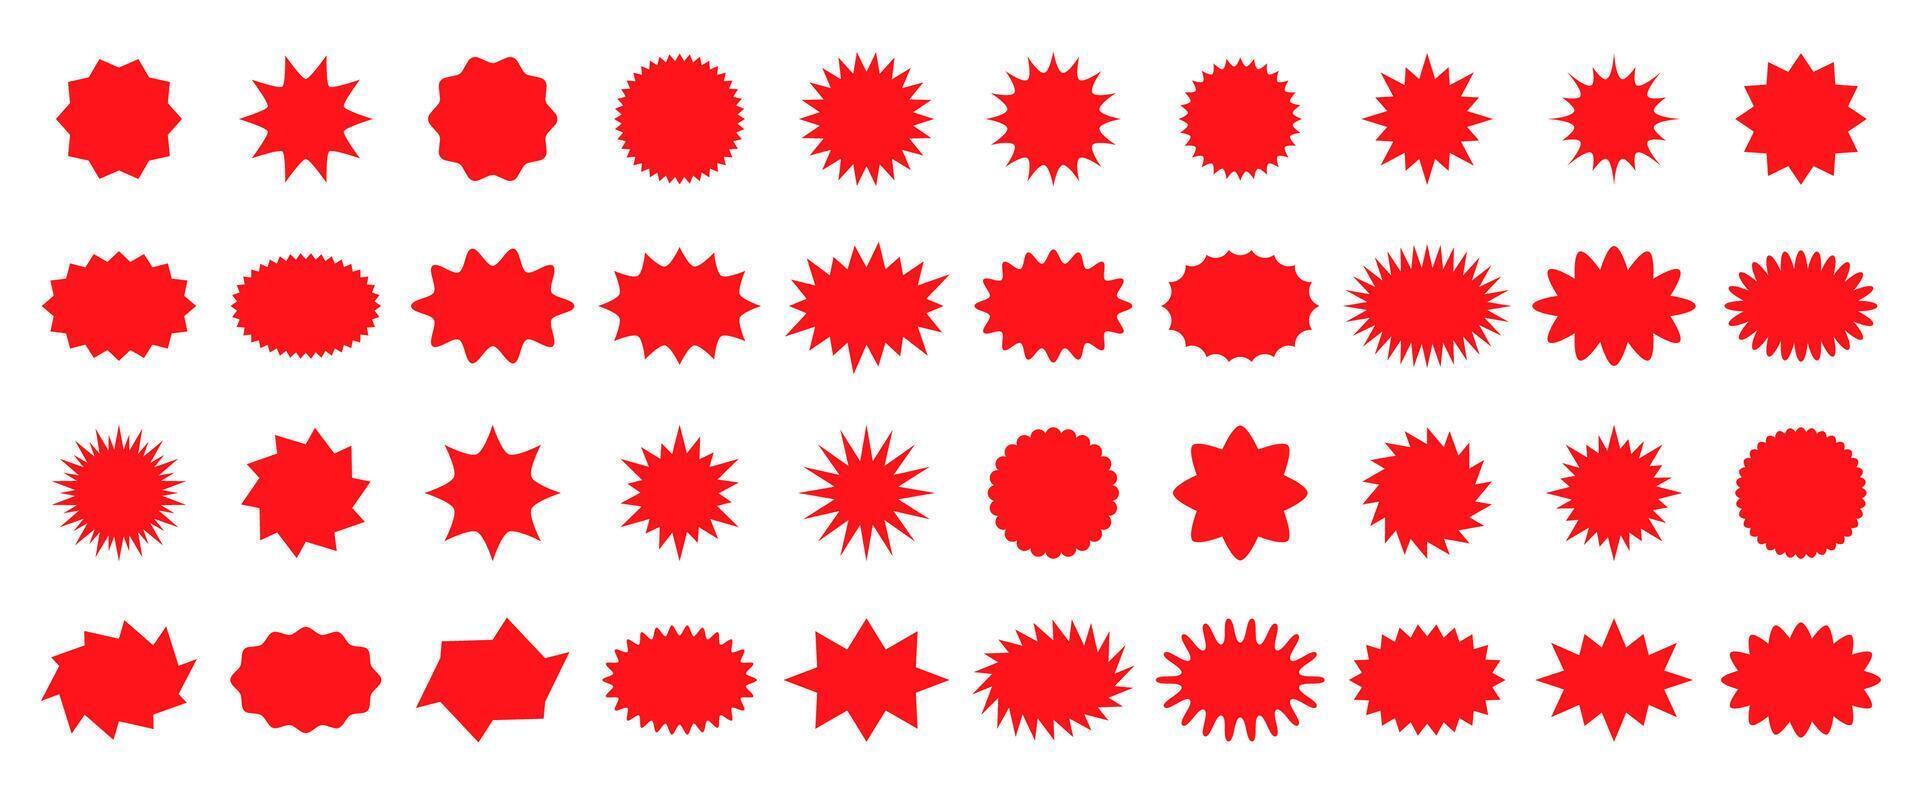 Red starburst sale price seals or callout stickers vector